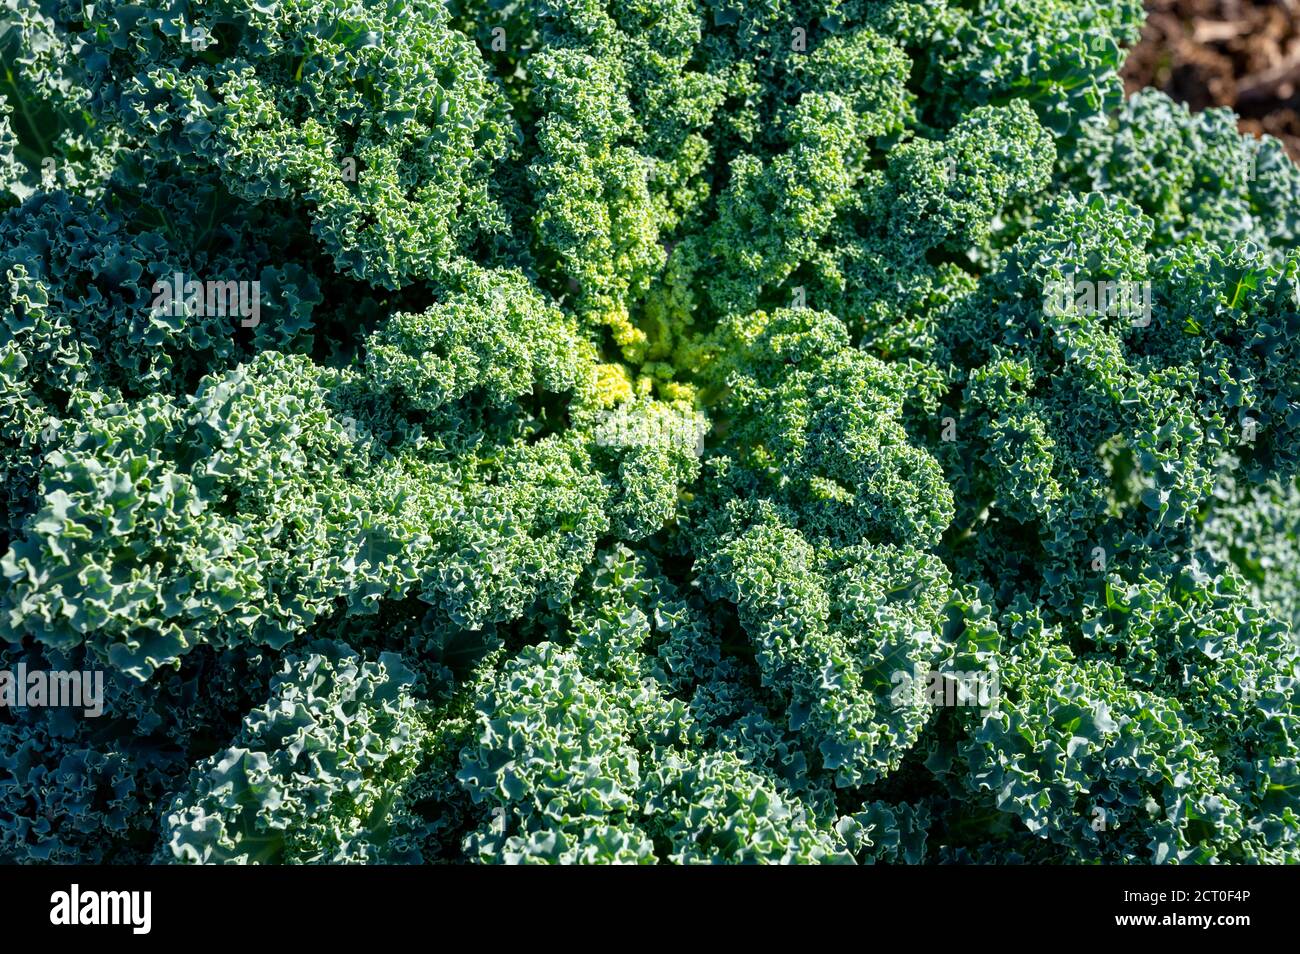 Organic green leaf curly kale cabbage growing in garden close up Stock Photo